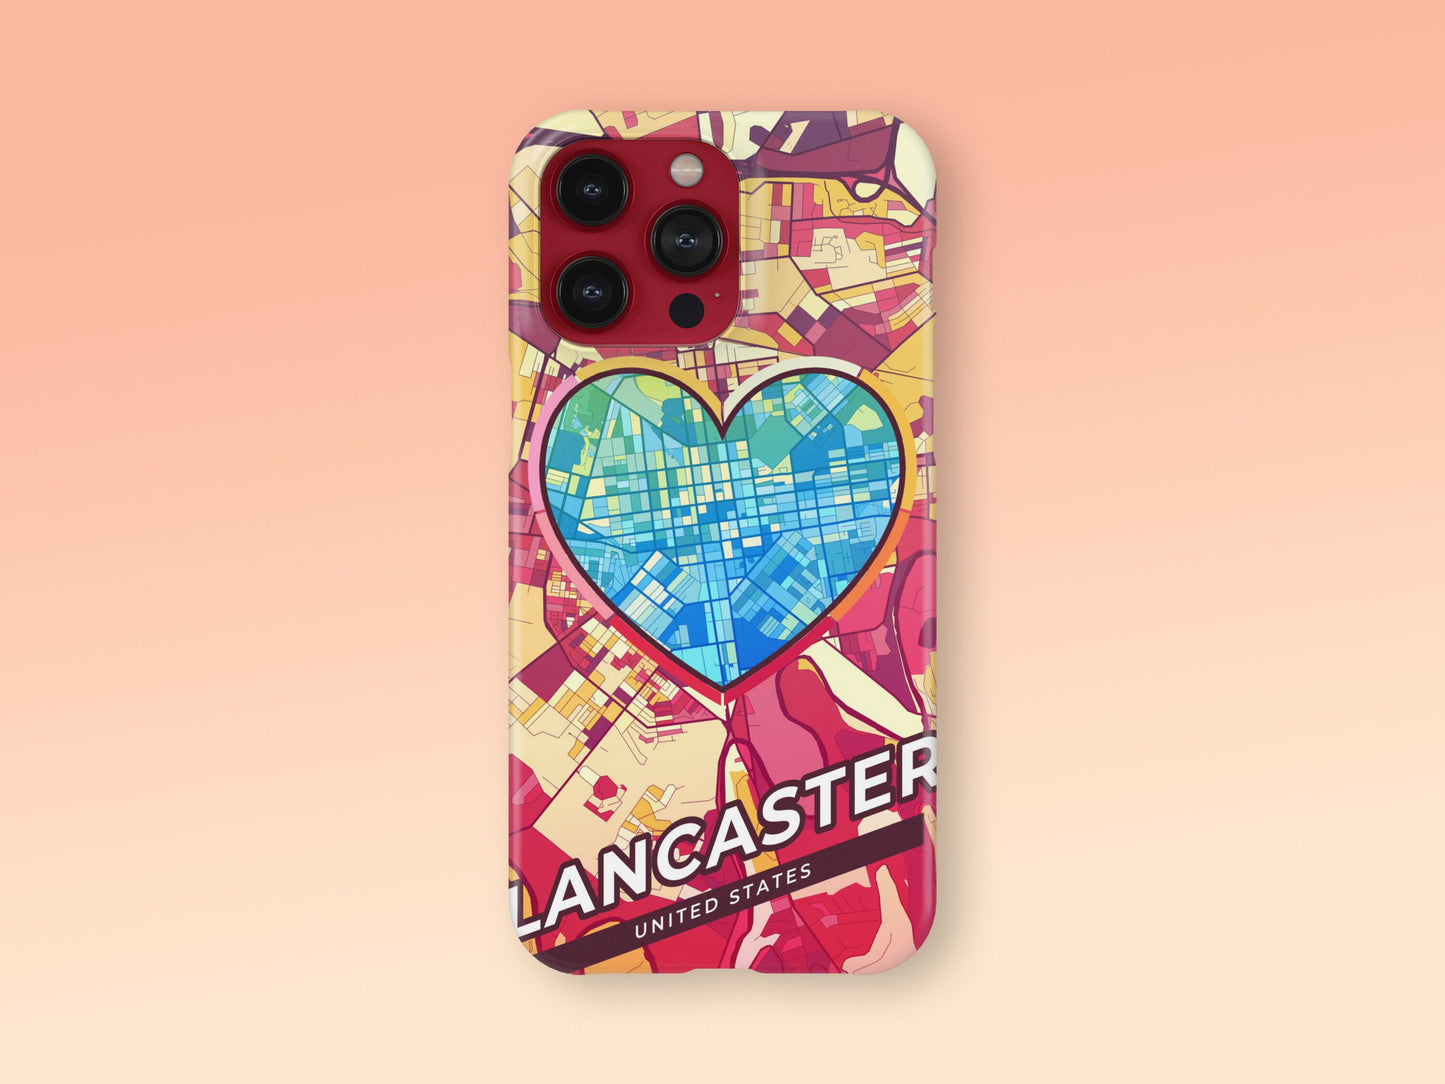 Lancaster Pennsylvania slim phone case with colorful icon. Birthday, wedding or housewarming gift. Couple match cases. 2